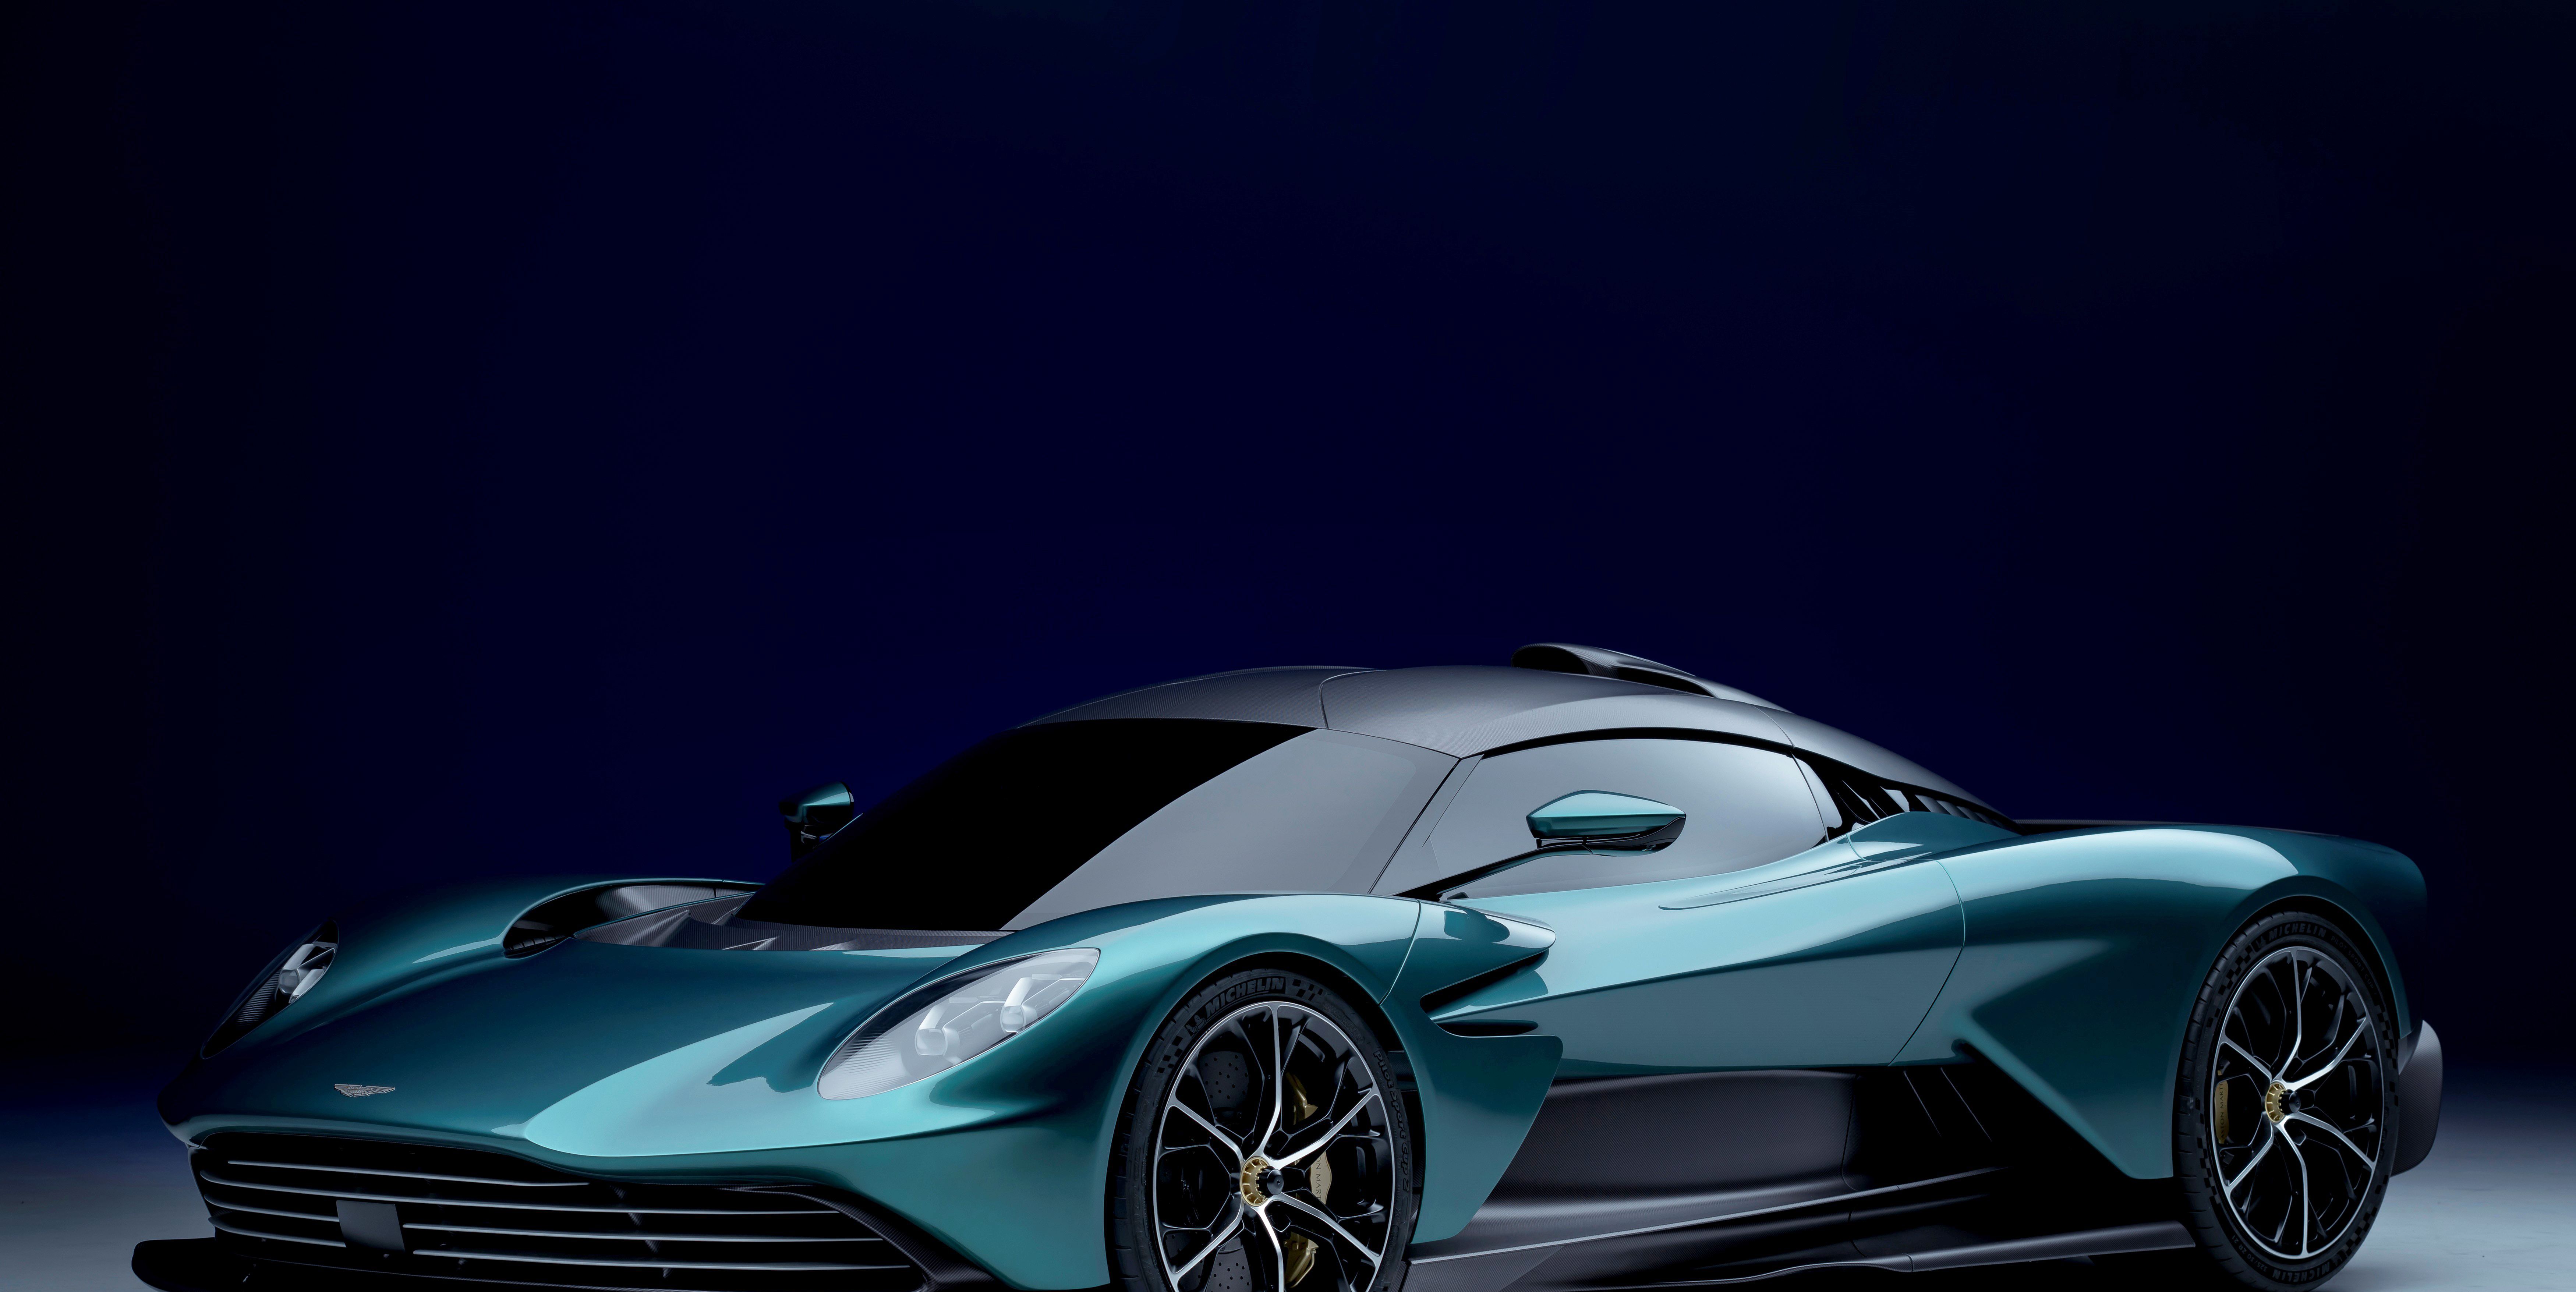 Aston Martin Has Deal to Develop New EVs and Battery Tech